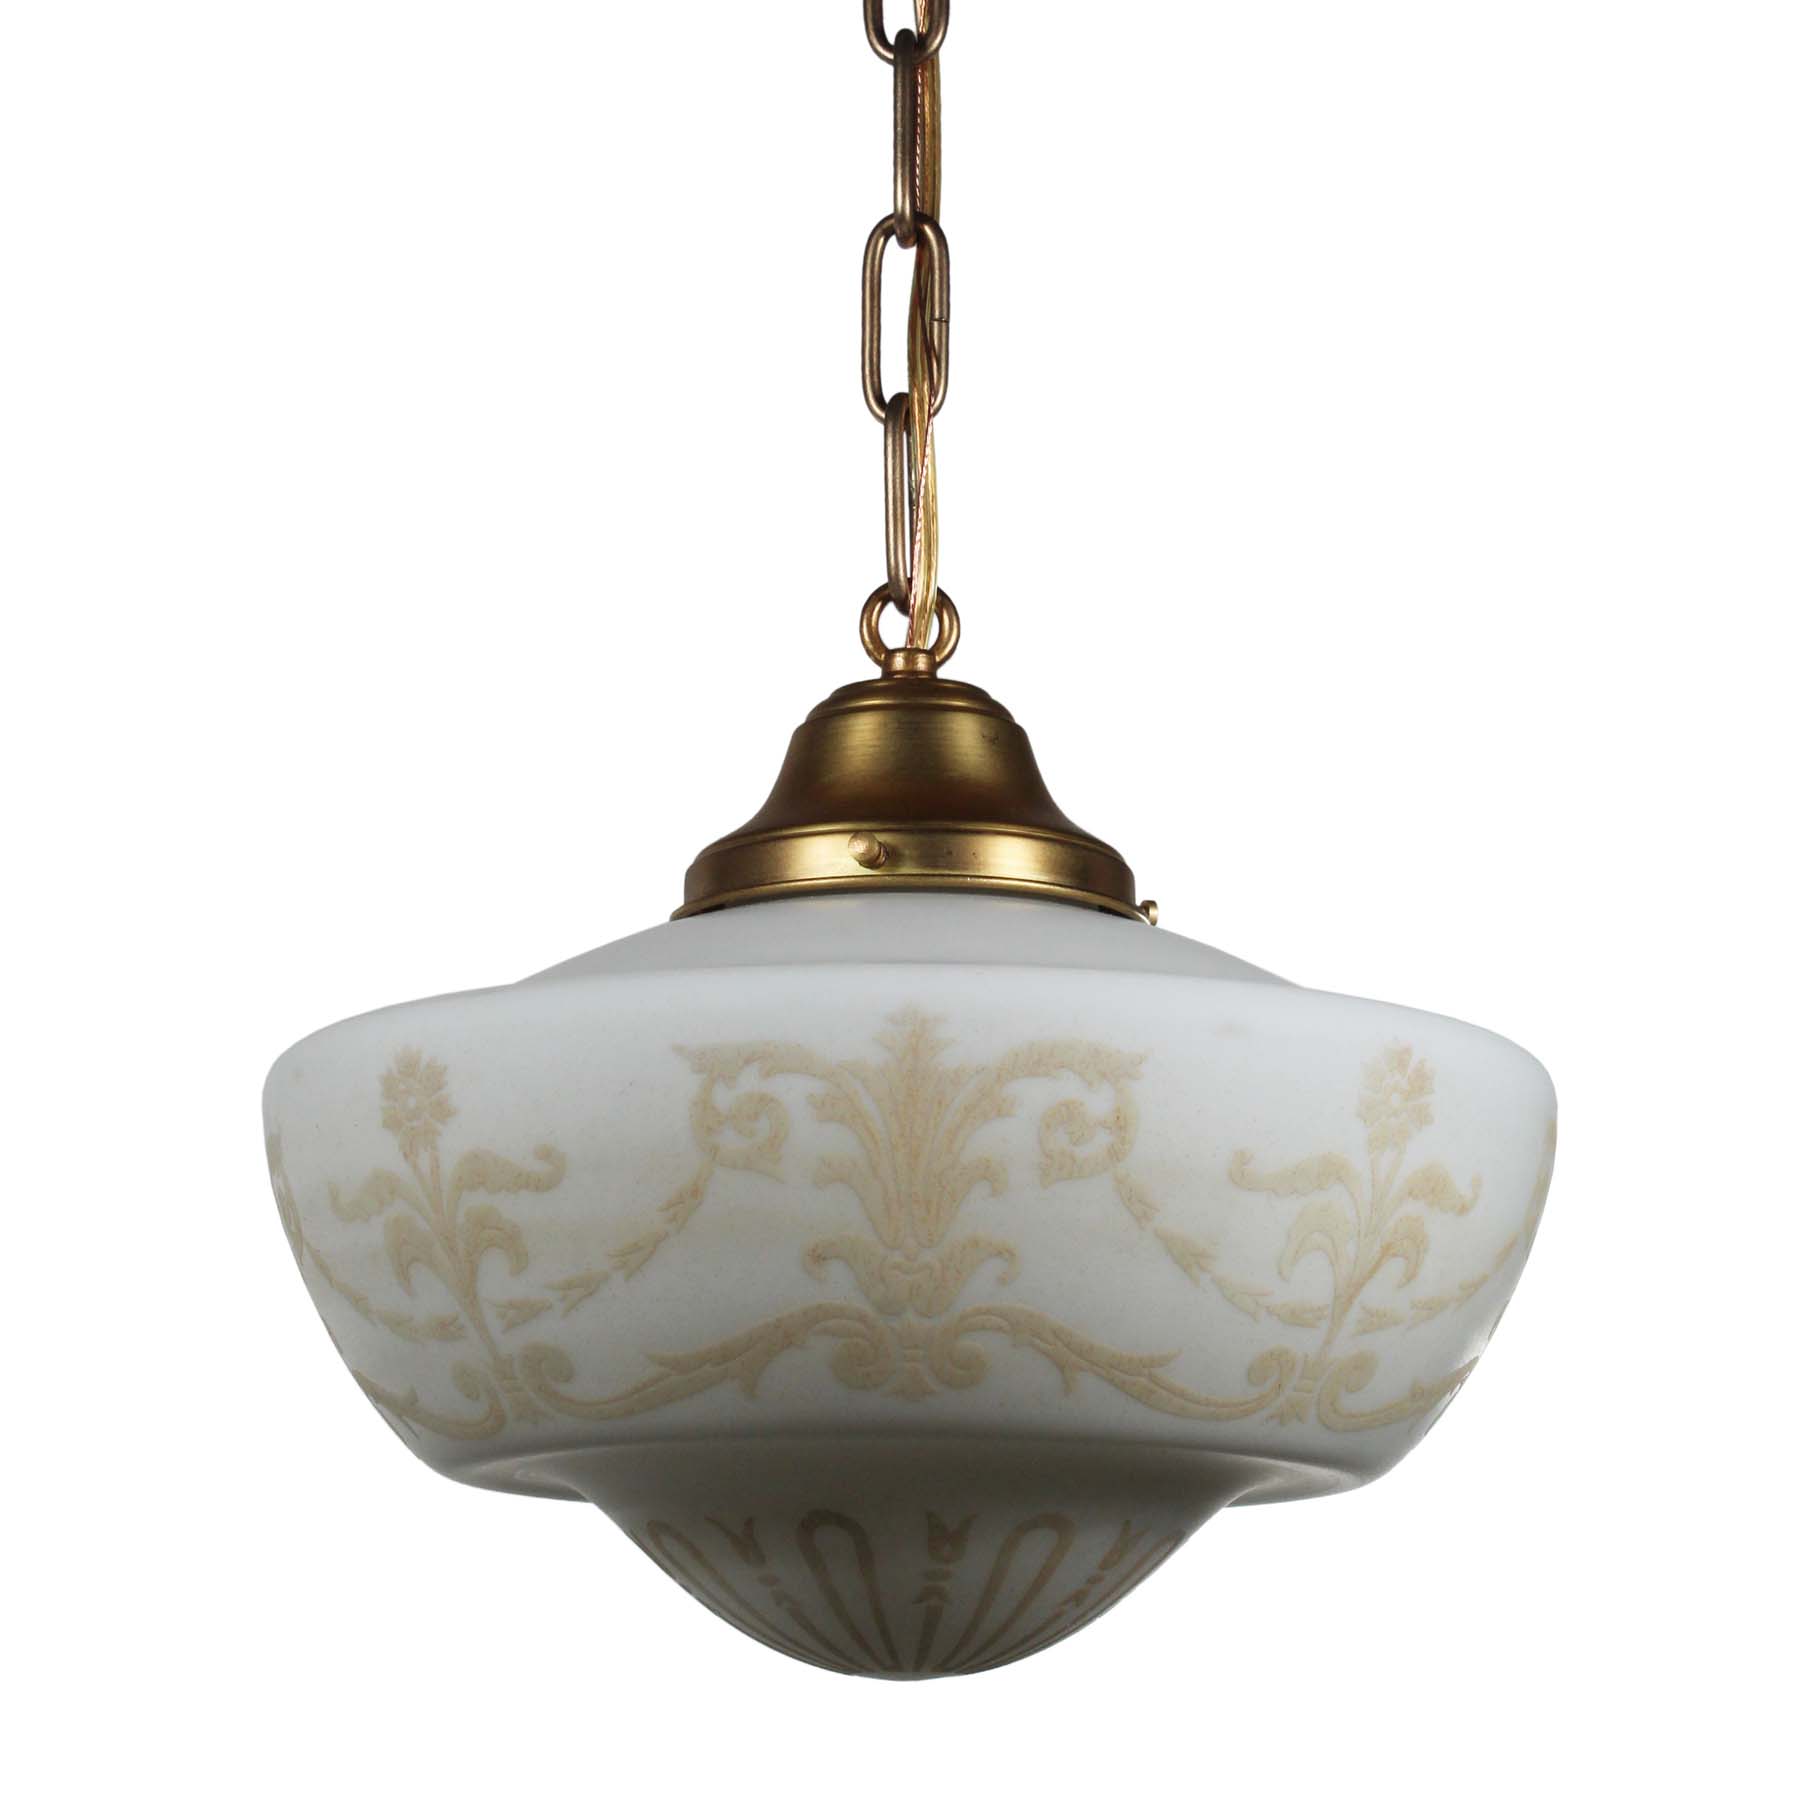 Neoclassical Pendant Lights with Acid Cut-Back Shades, Antique Lighting